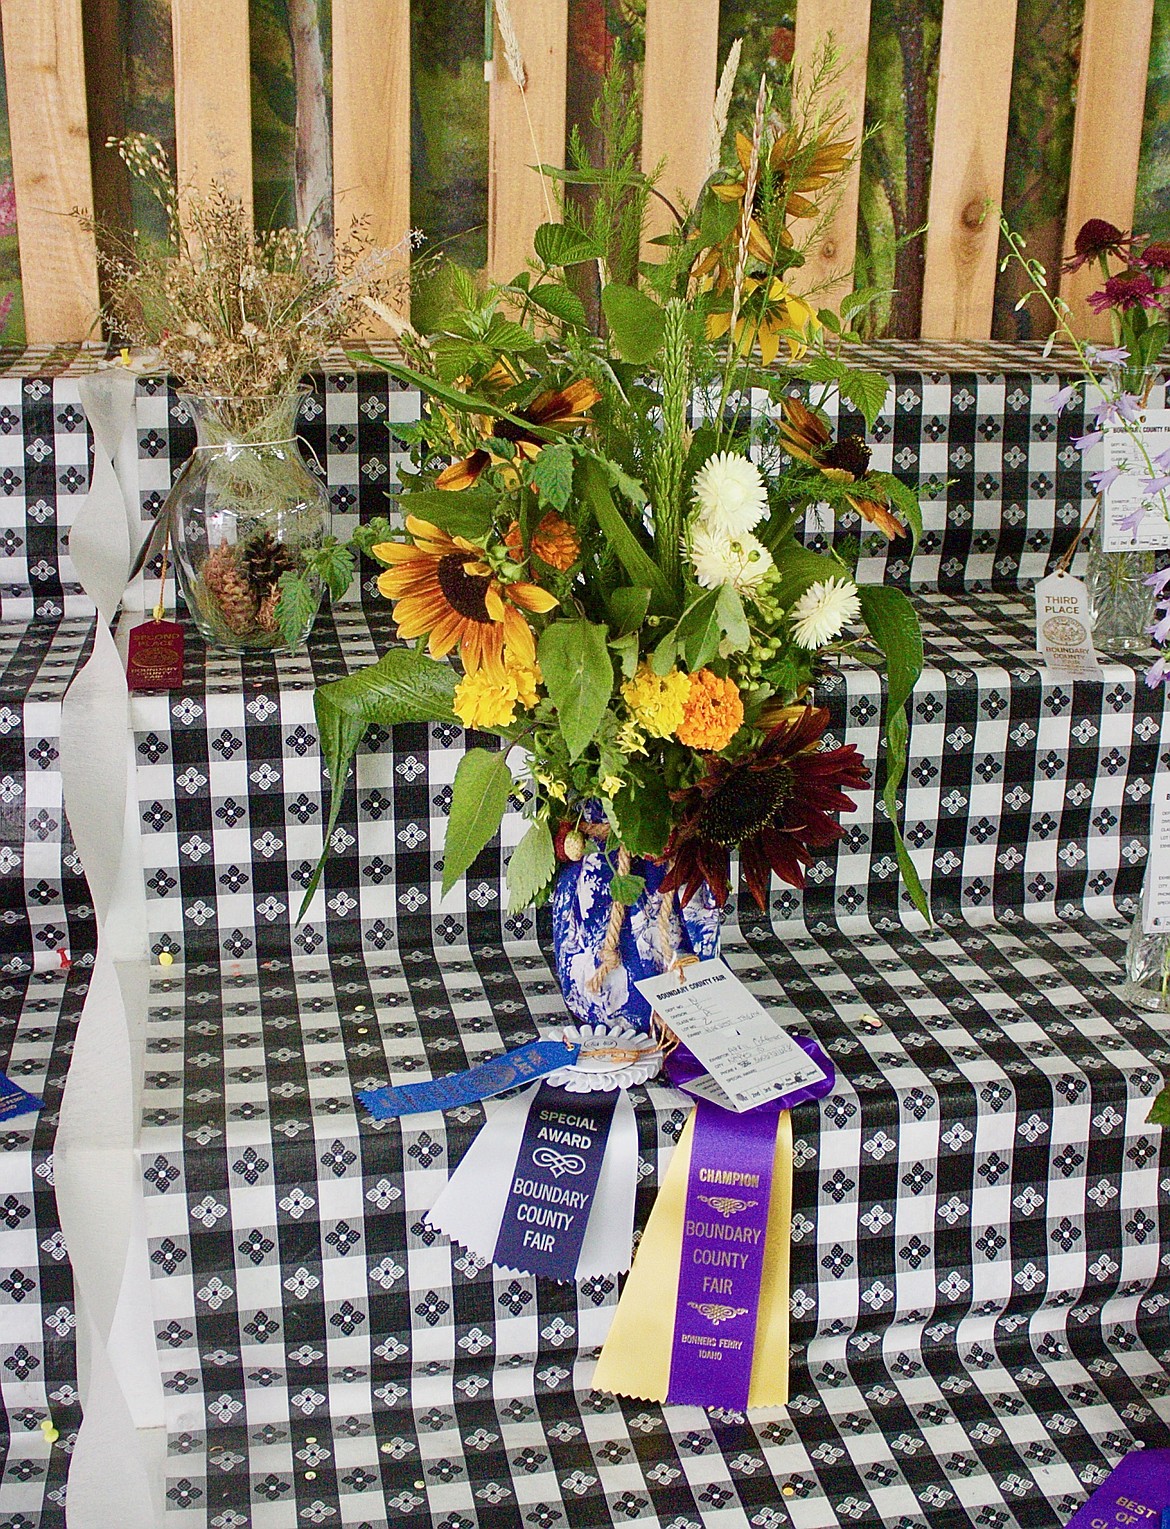 April Coffman's Harvest Themed floral arraignment won, grand champion, special award and a blue ribbon.